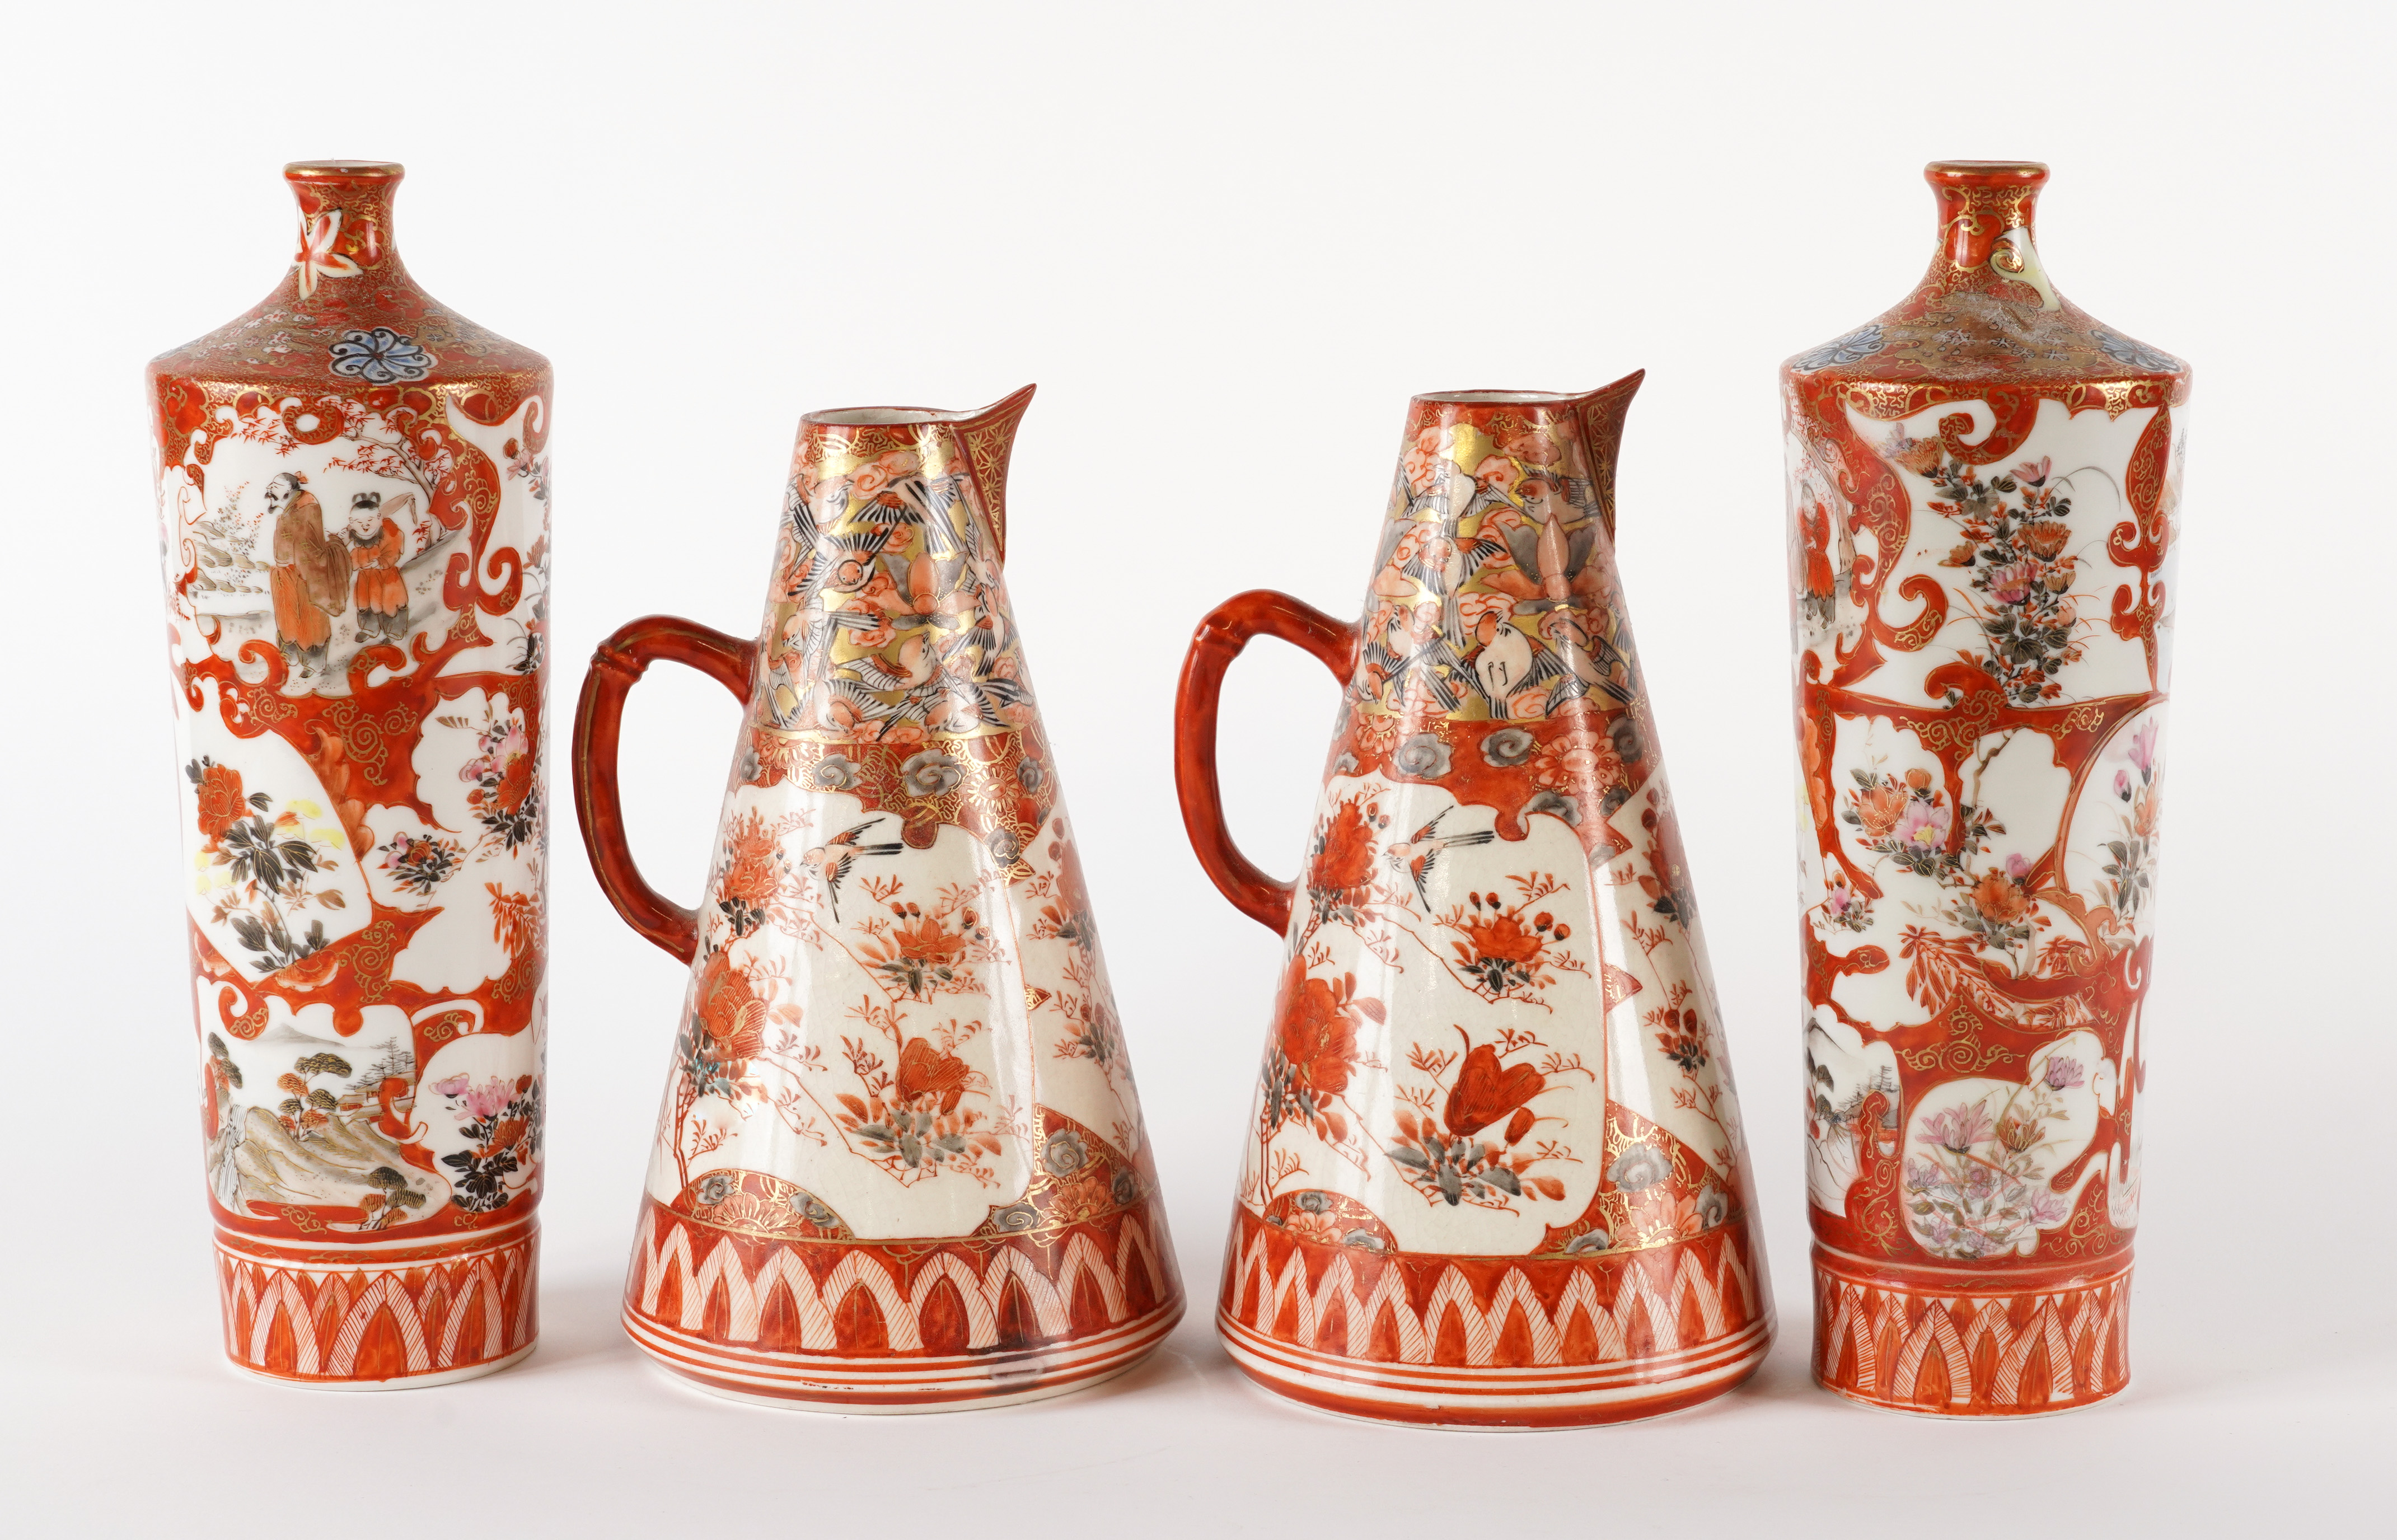 A PAIR OF JAPANESE KUTANI CONICAL JUGS AND A PAIR OF TAPERED CYLINDRICAL VASES (4) - Image 3 of 5